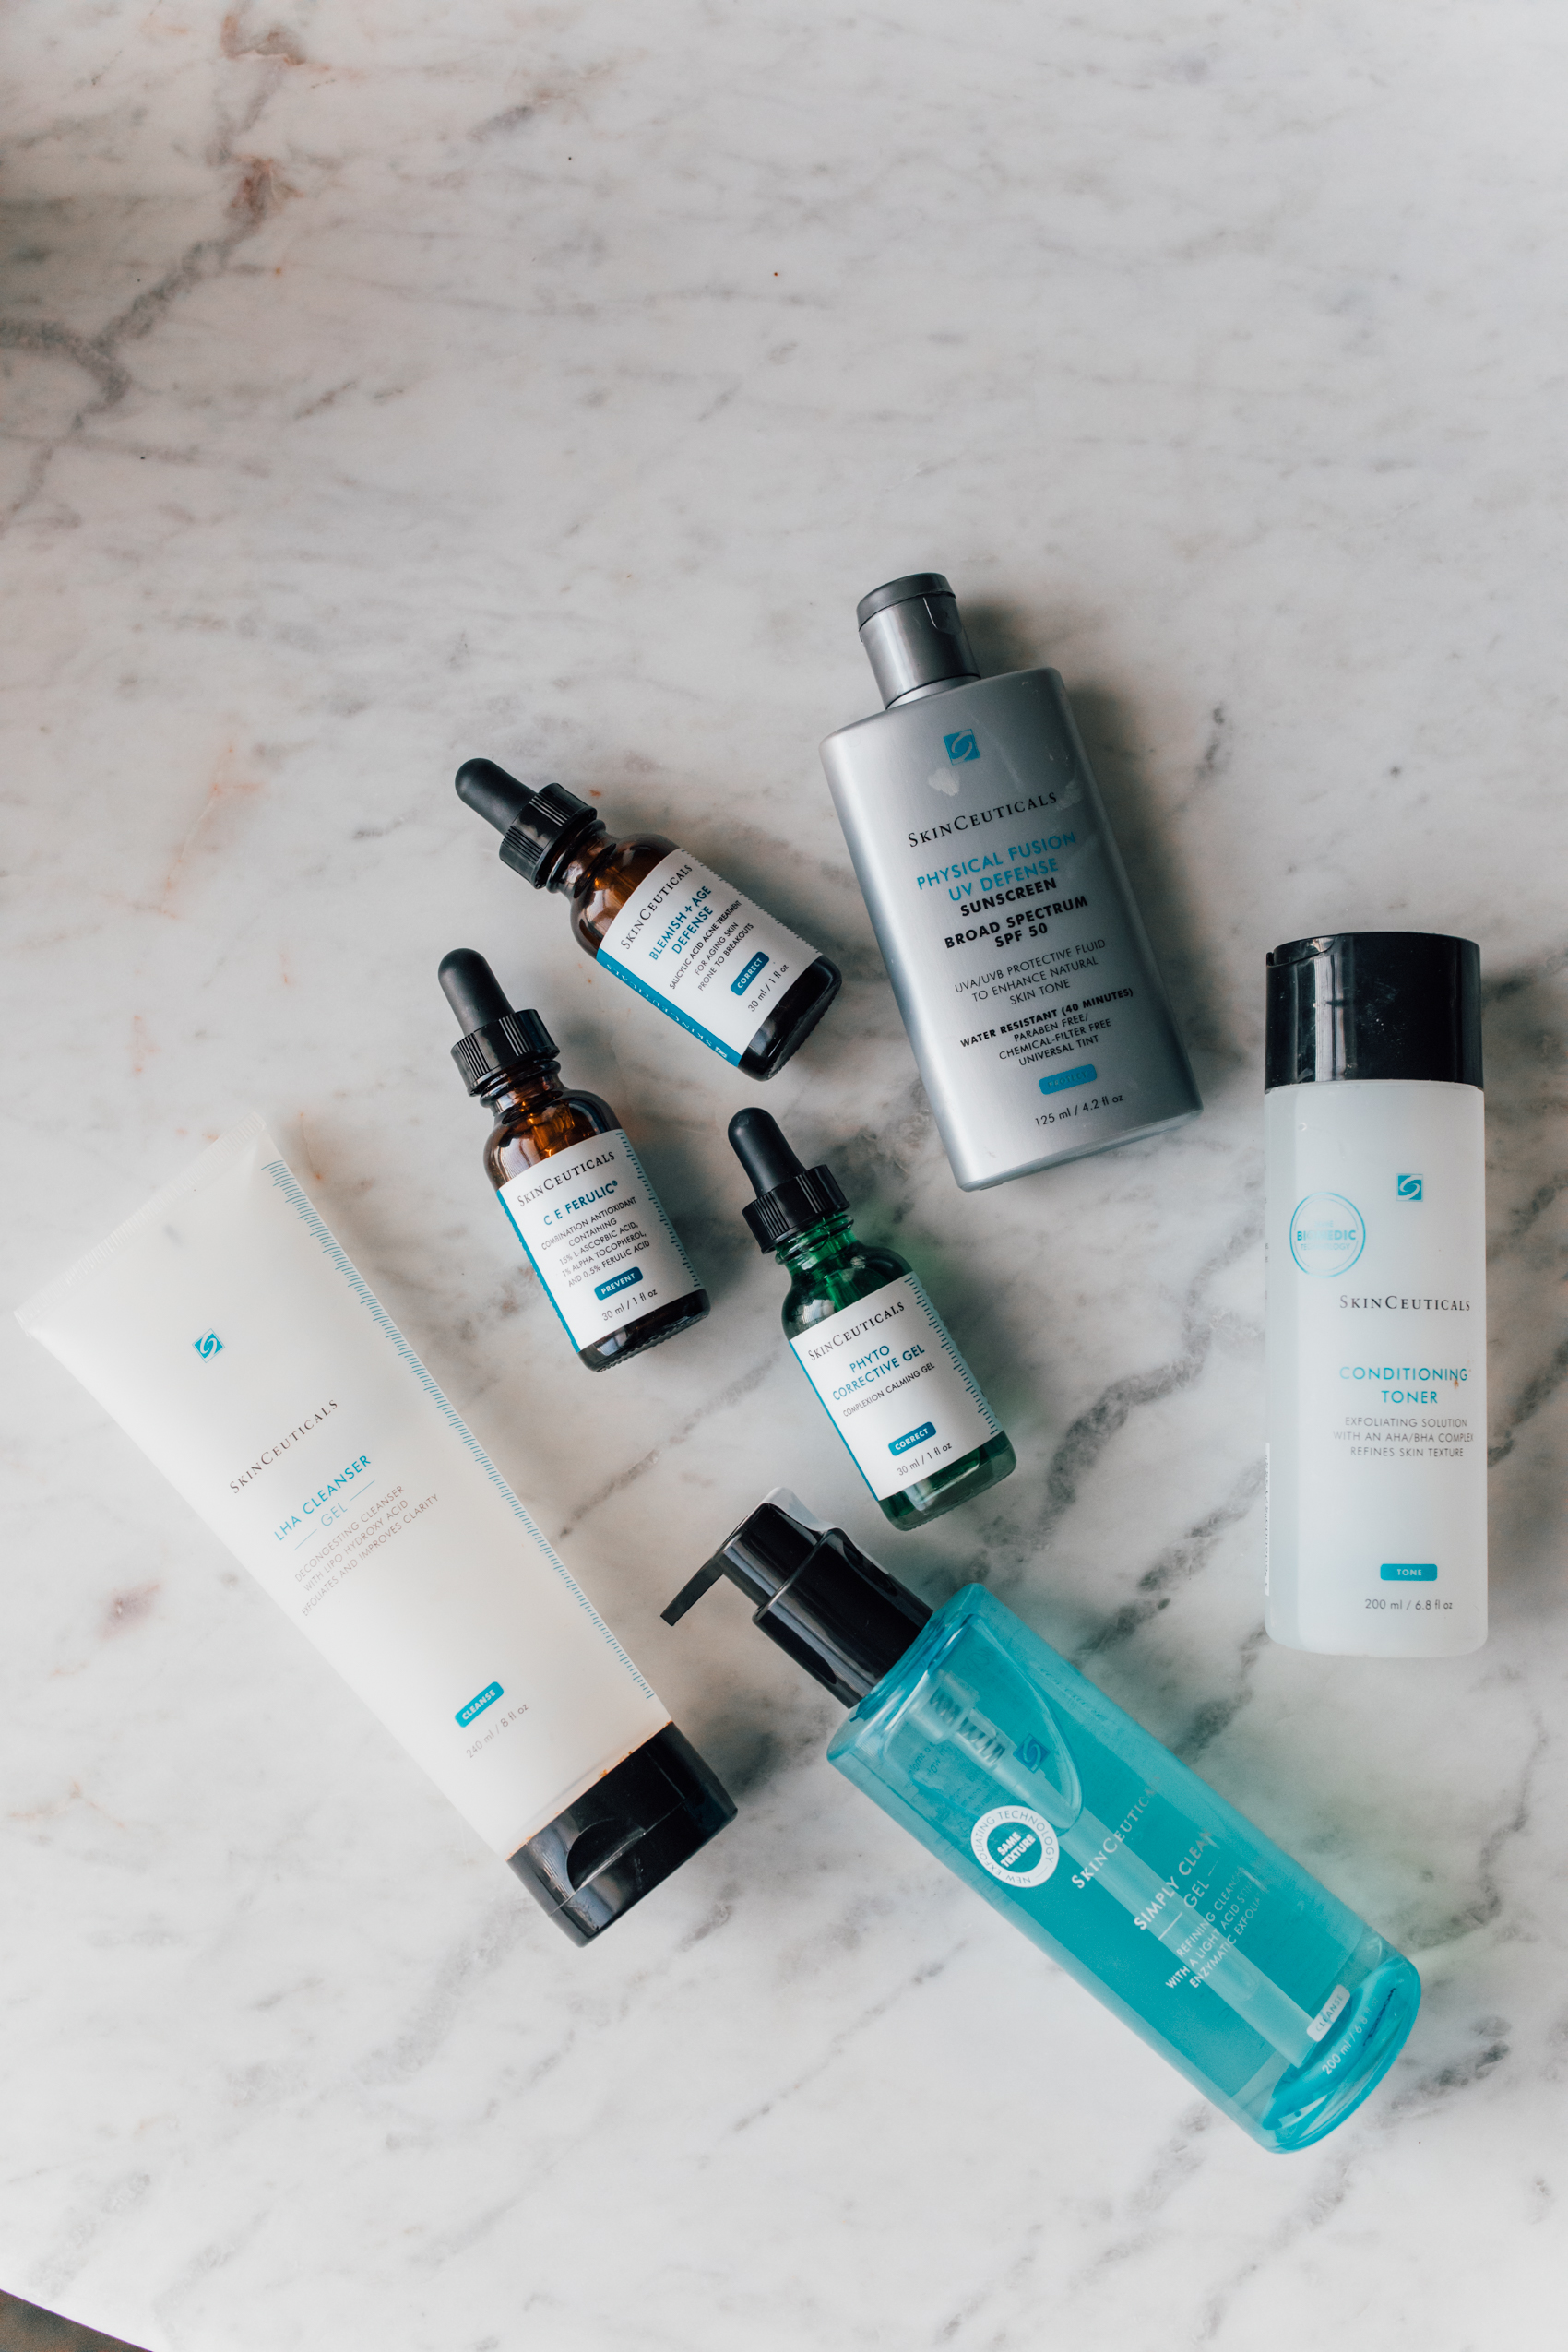 The tested Skinceuticals skincare products I swear by